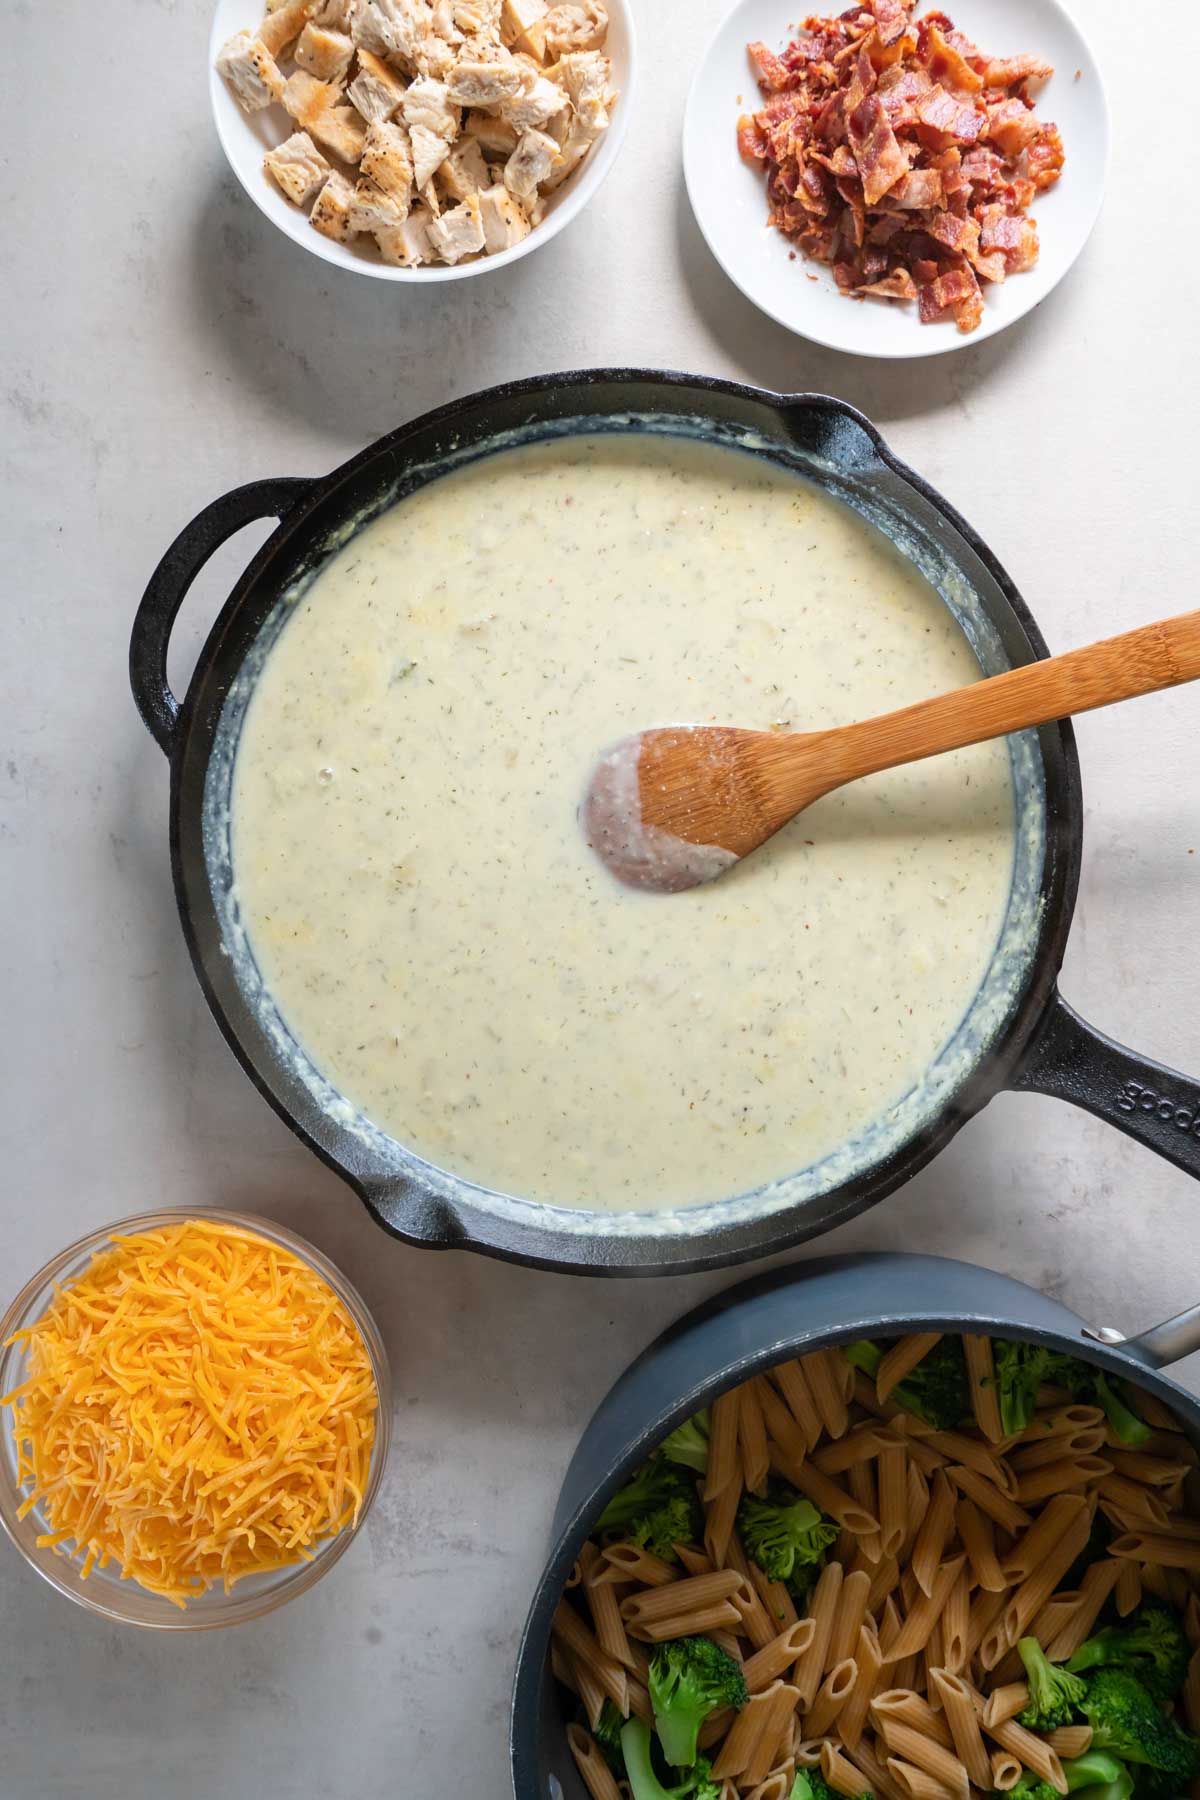 Creamy ranch seasoned sauce in skillet with wooden spoon.